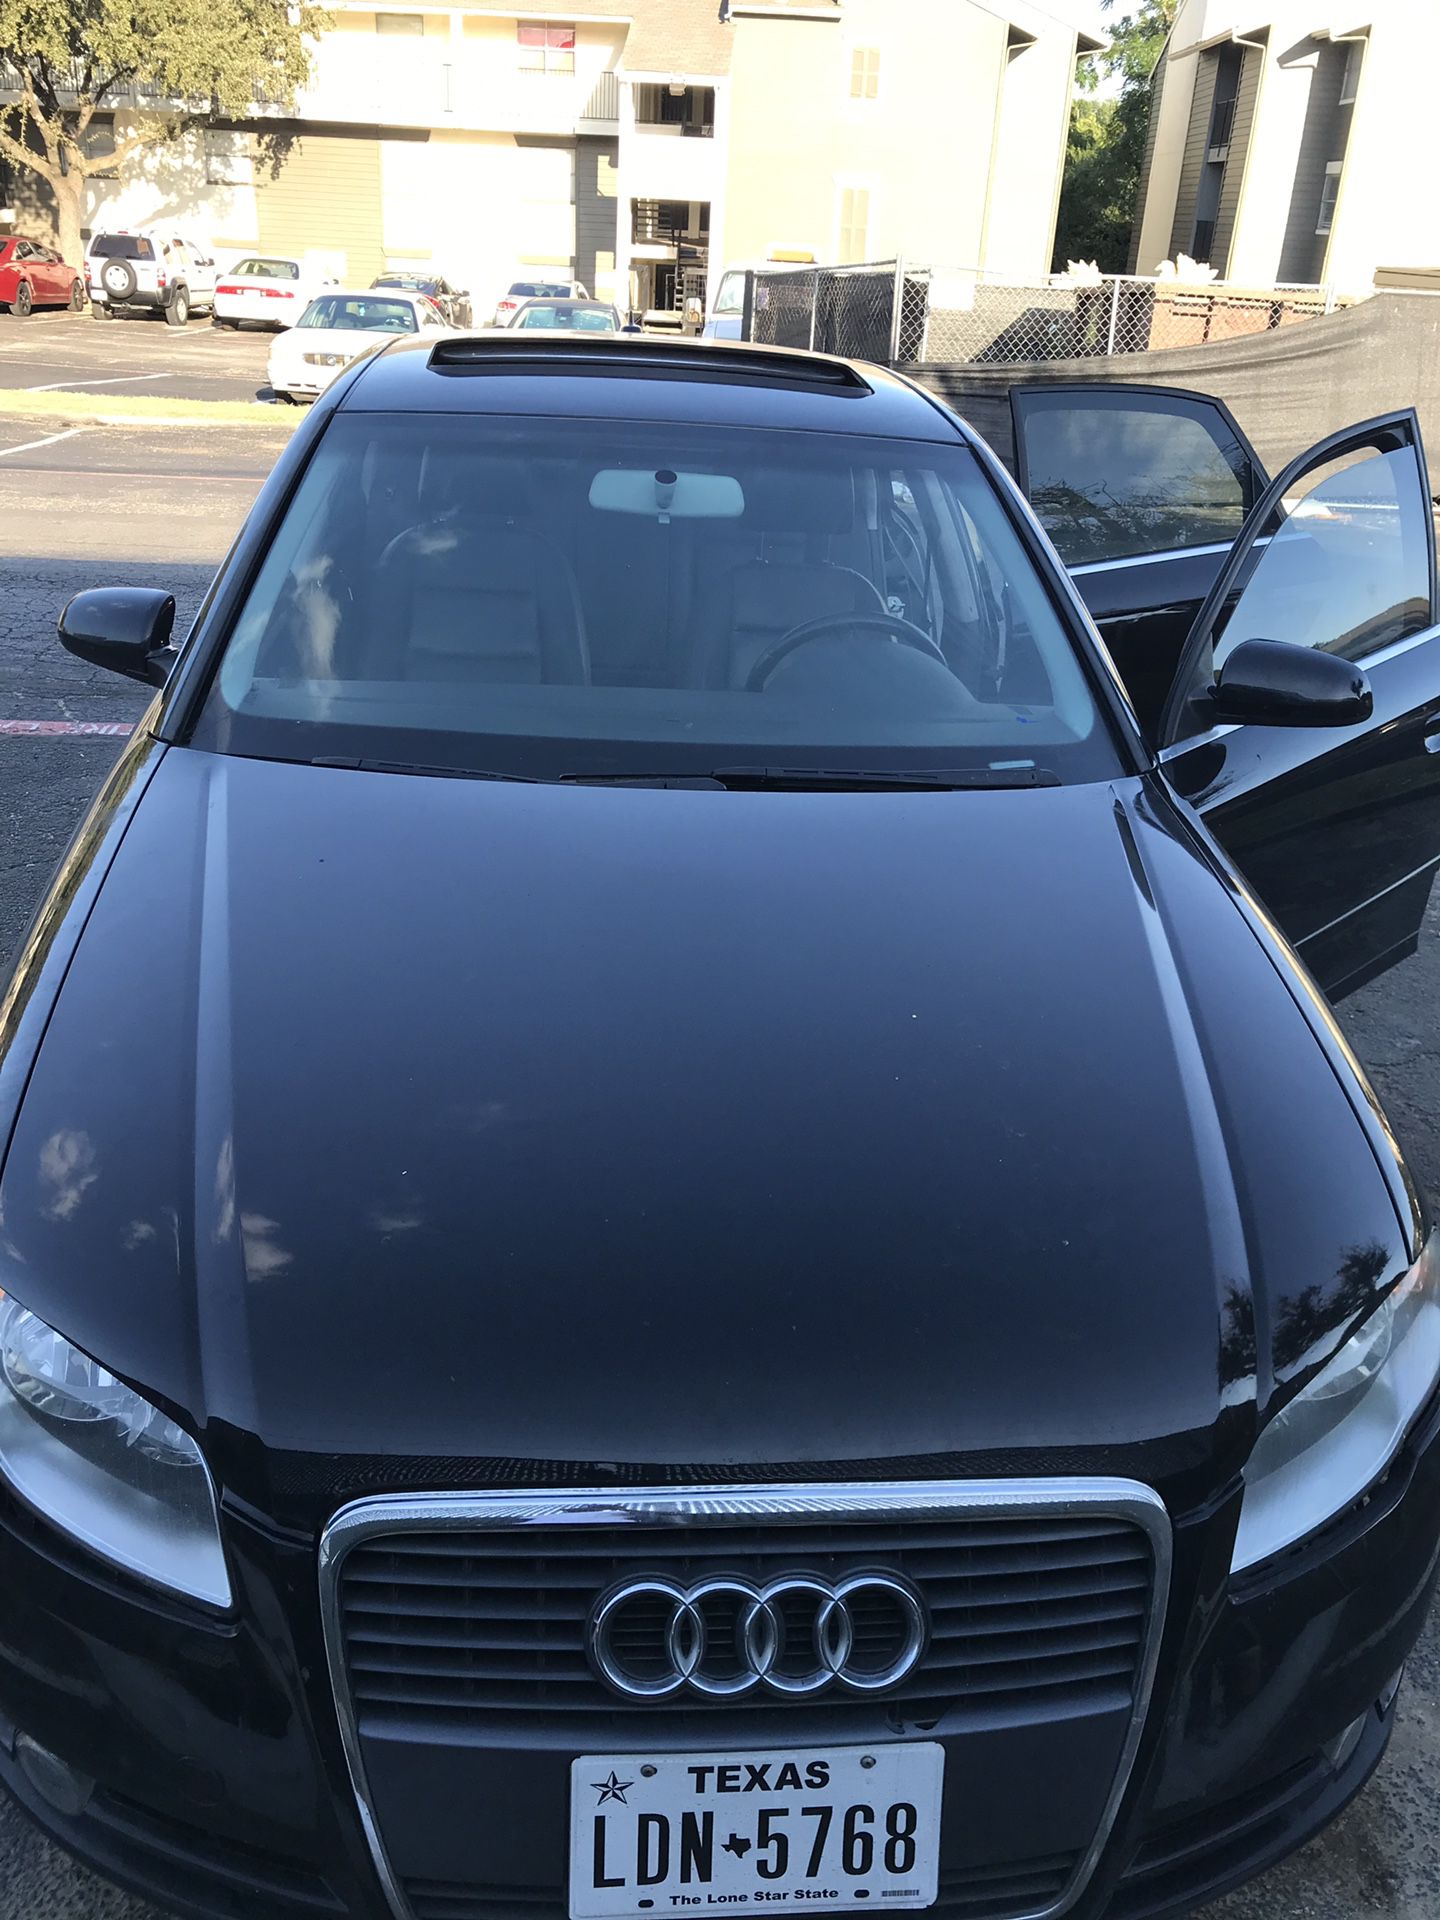 Audi A4 2007 parts for quick sale, while car parts for $1200, buy may repair car.